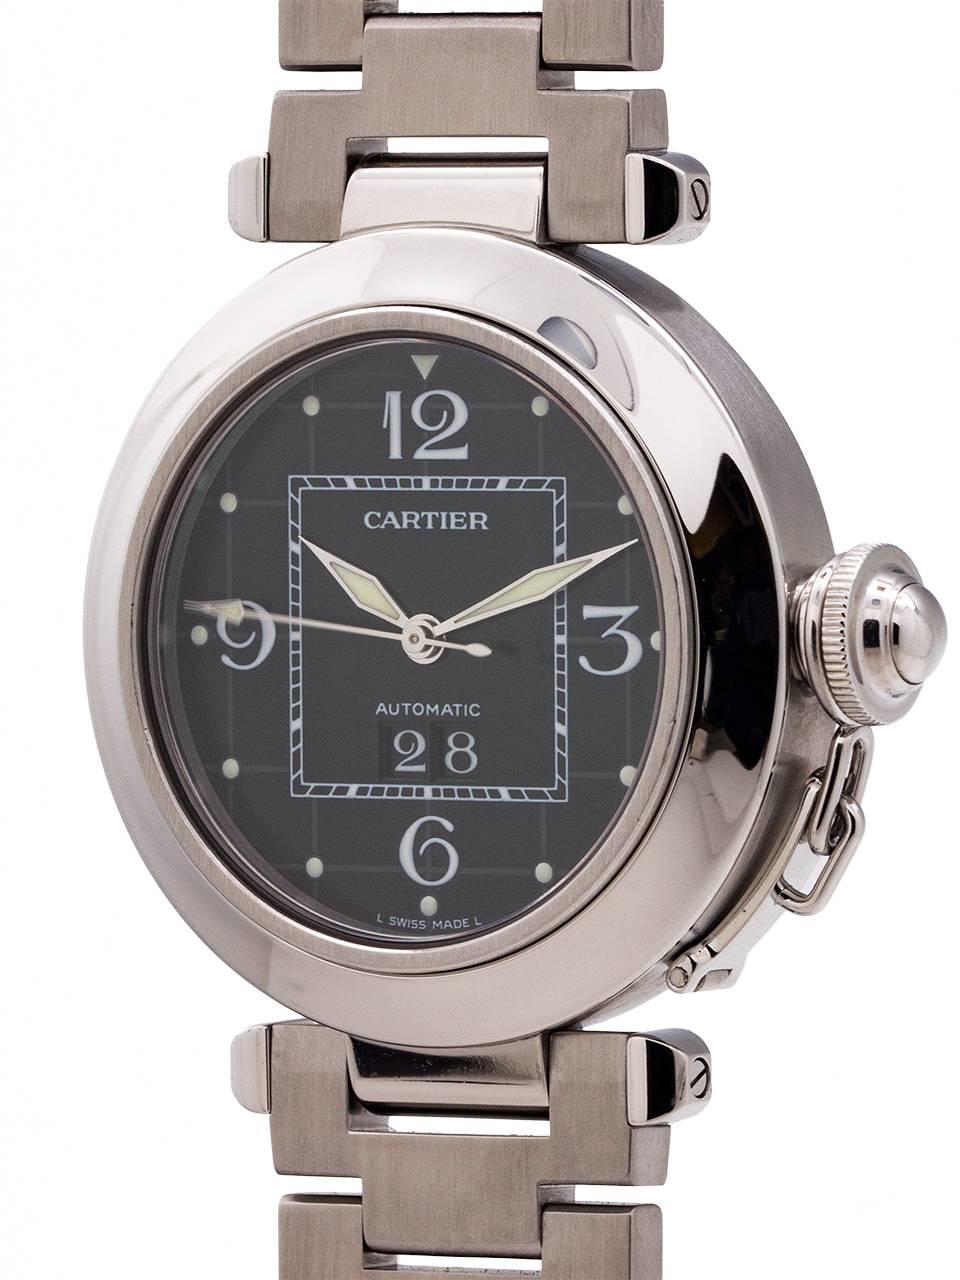 
Cartier Stainless Steel Pasha C ref 2475. 35.5 x 42 diameter case with smooth bezel, sapphire crystal and stainless steel screw down canteen style crown protector. Newer style so called “big date” window. Featuring original black dial with large